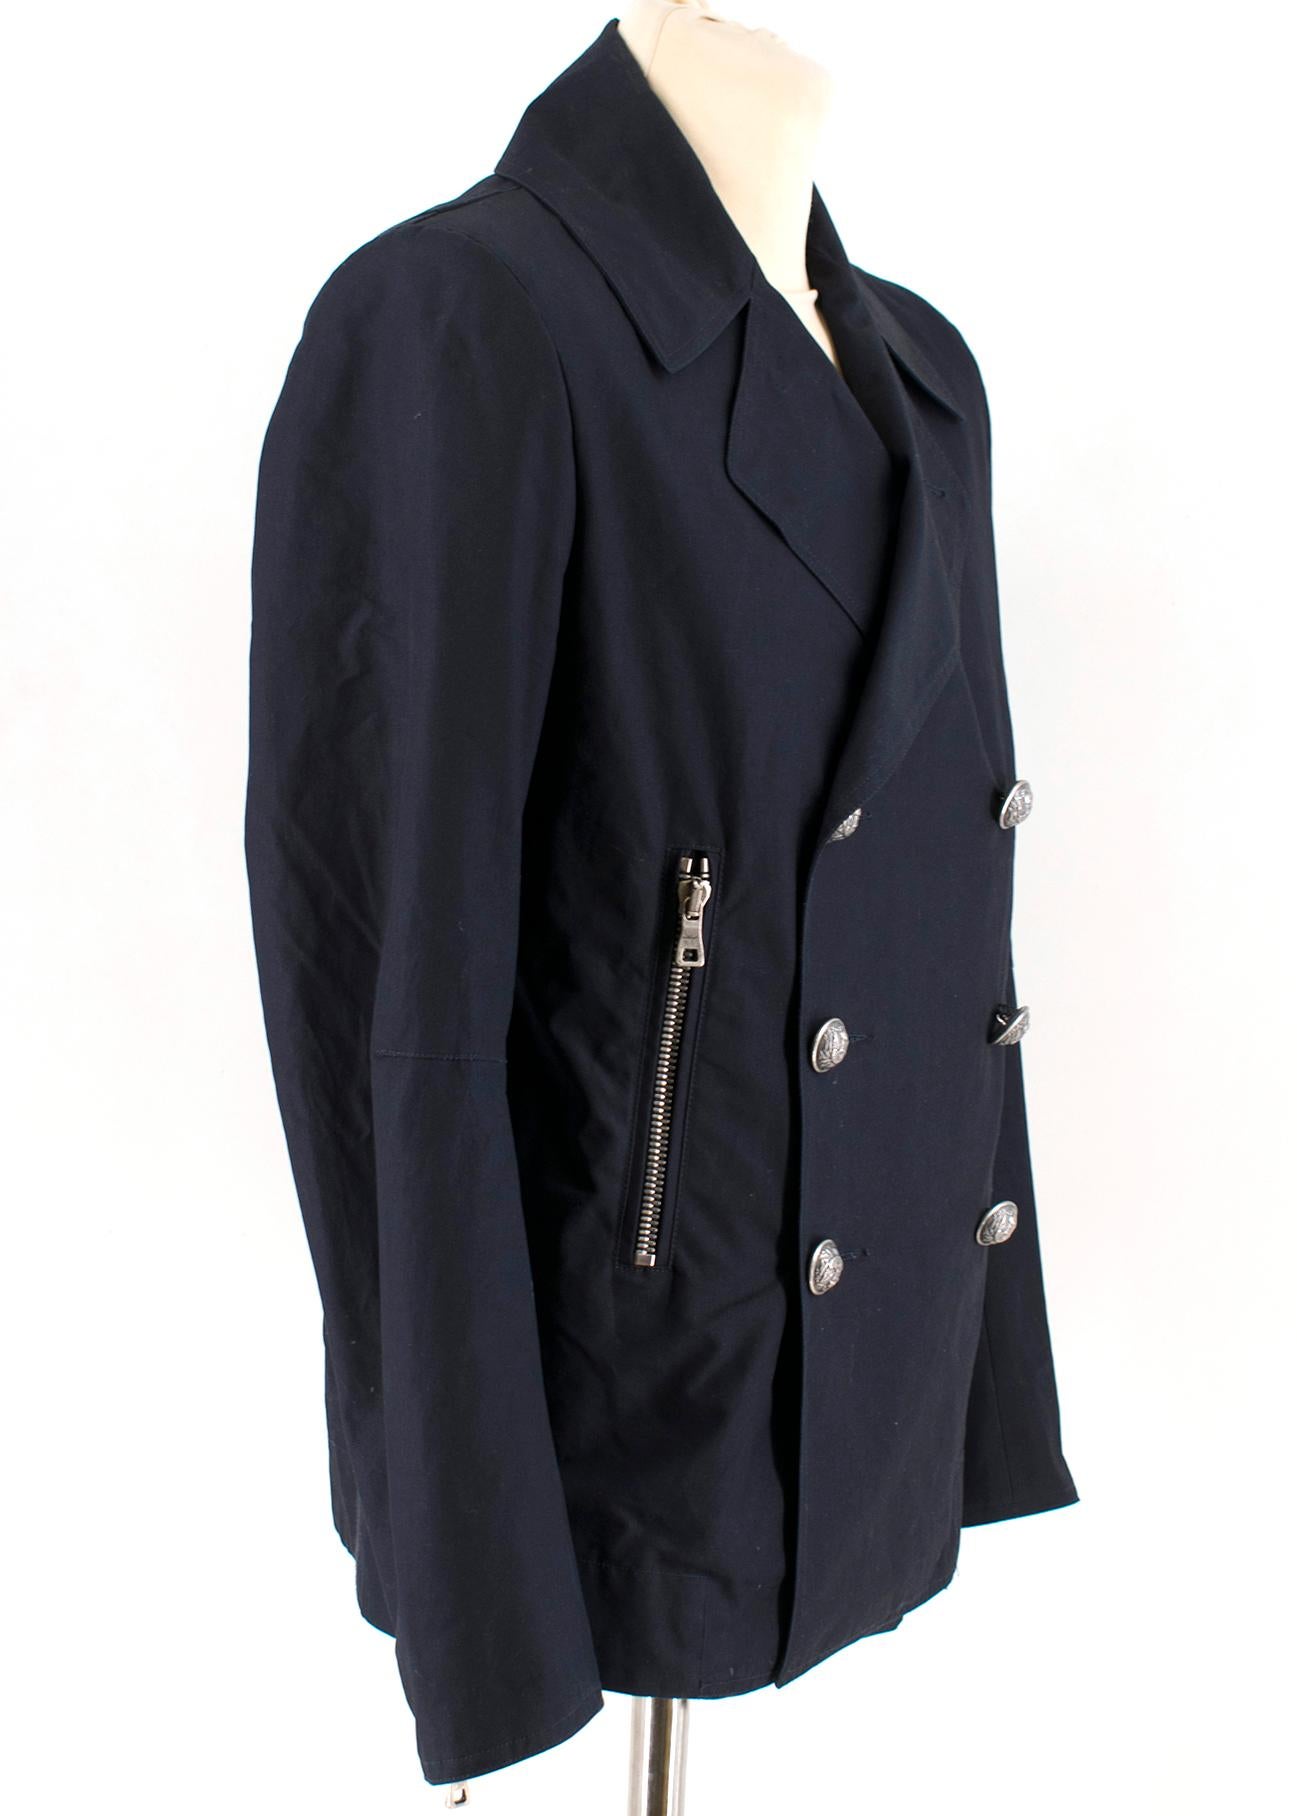 Balmain Men's Navy Double Breasted Peacoat

- Navy blue cotton coat 
- Double-breasted button fastening
- Two zippered pockets 
- Embossed silver-tone buttons
- Silver-tone zips
- Lightly padded shoulders
- Unlined

Please note, these items are